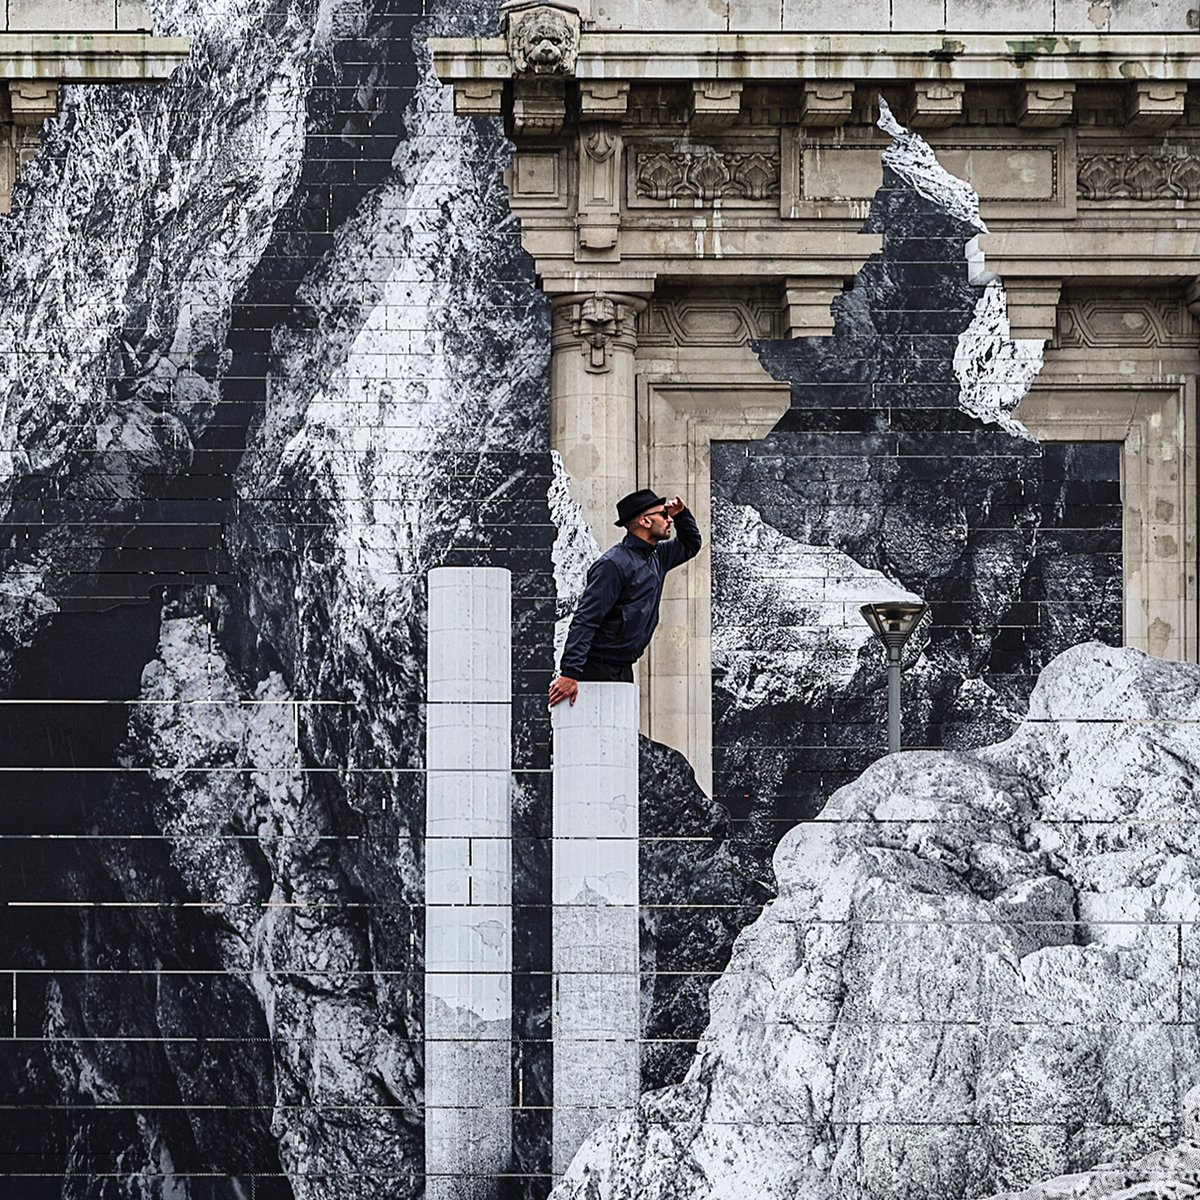 In Milan, @JRart has transformed Piazza Duca d'Aosta, and Milano Centrale Railway Statio with his installation 'La Nascita,' on display until May 1. Learn more about Pace artists in Italy during the upcoming Venice Biennale: bit.ly/4a2W7lL